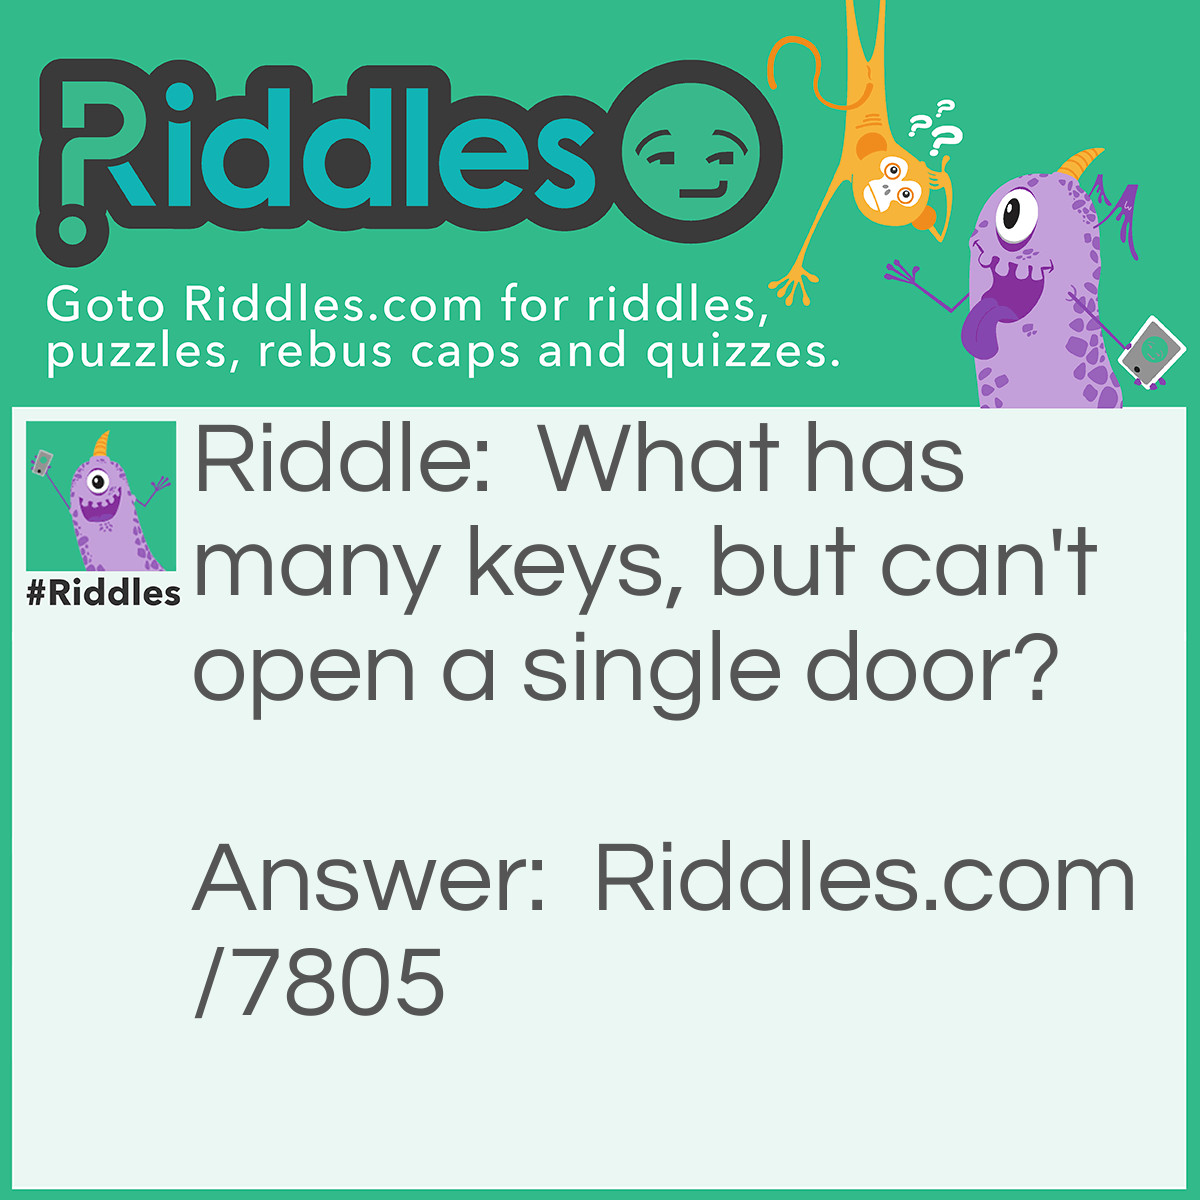 Riddle: What has many keys, but can't open a single door? Answer: A Piano.